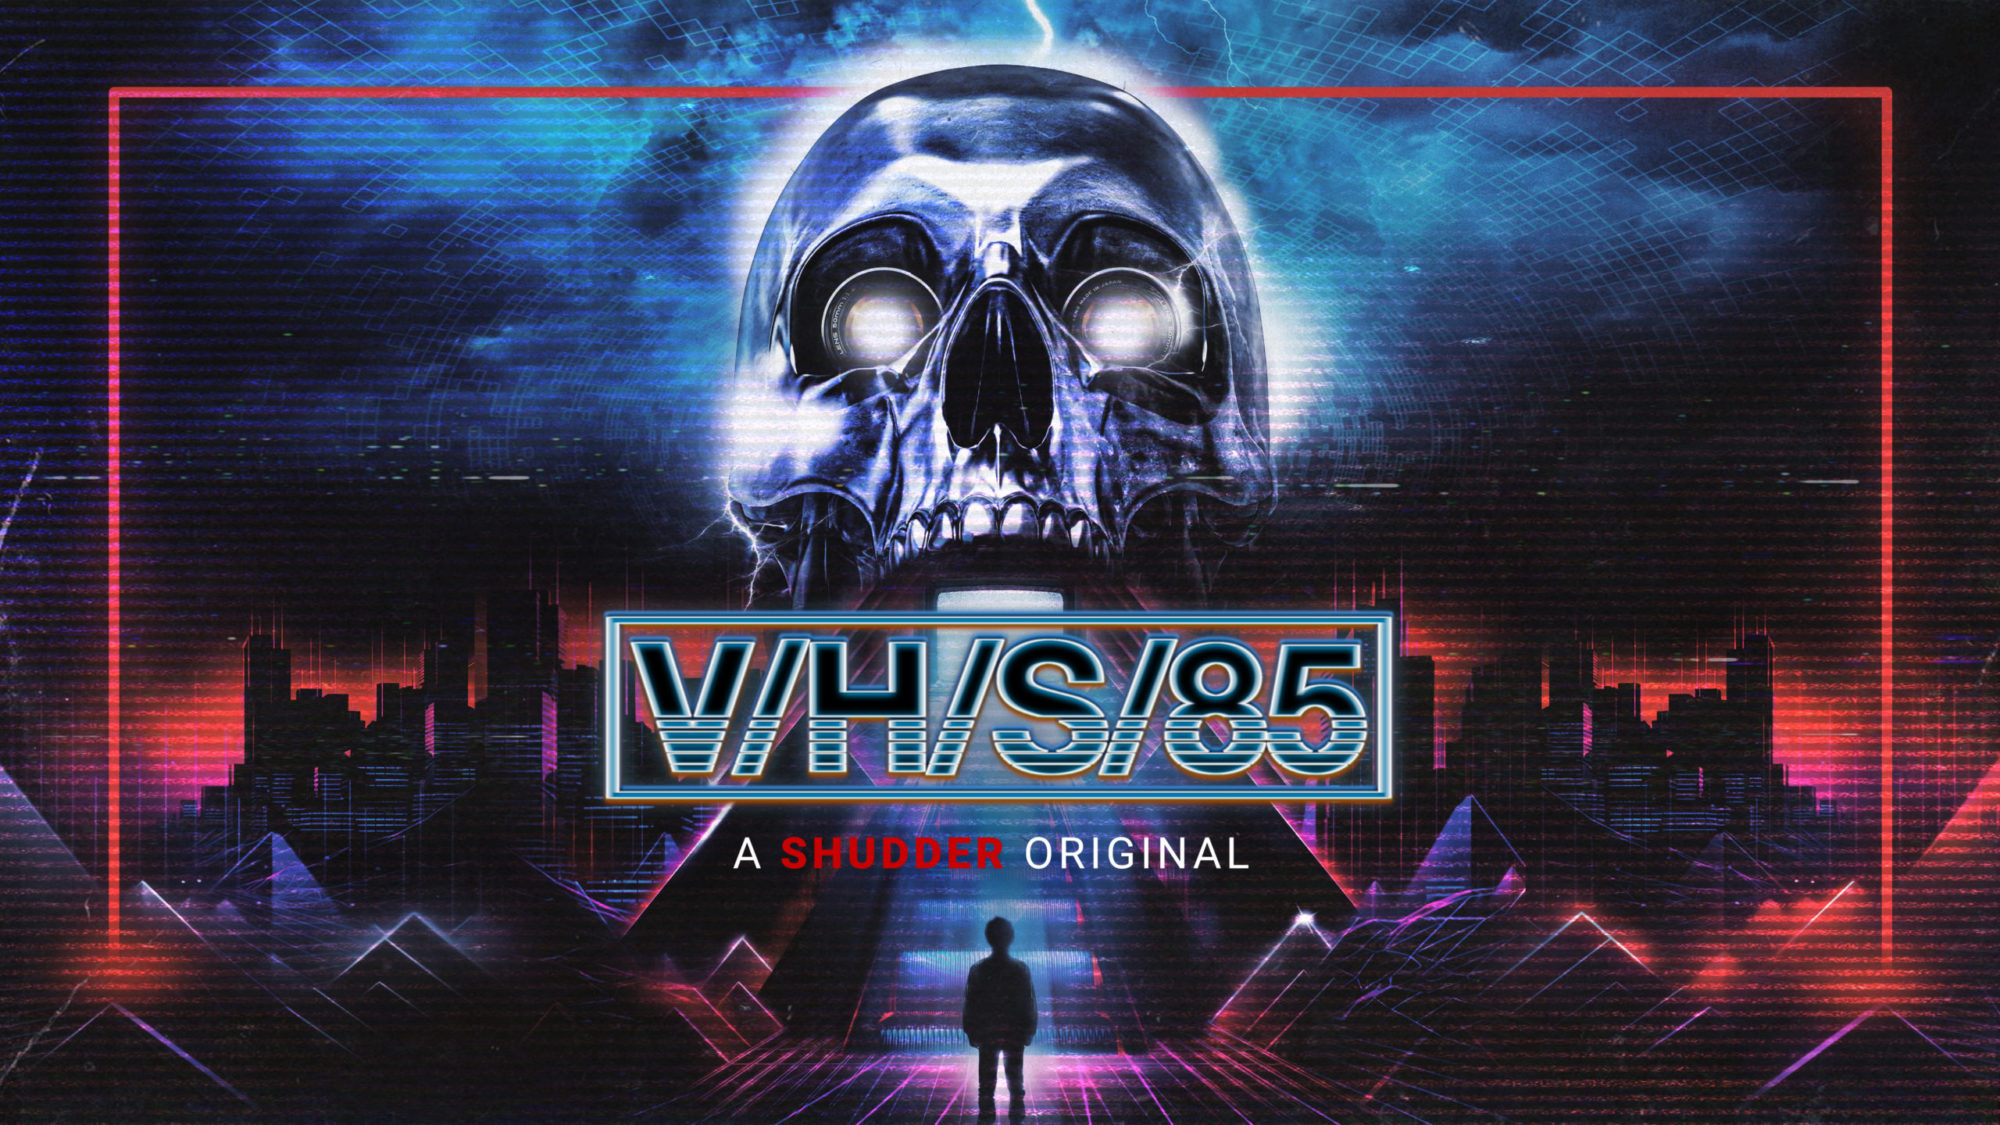 Review: ‘V/H/S/85’The Latest Entry In The Found Footage Anthology Series Sits Among Its Best